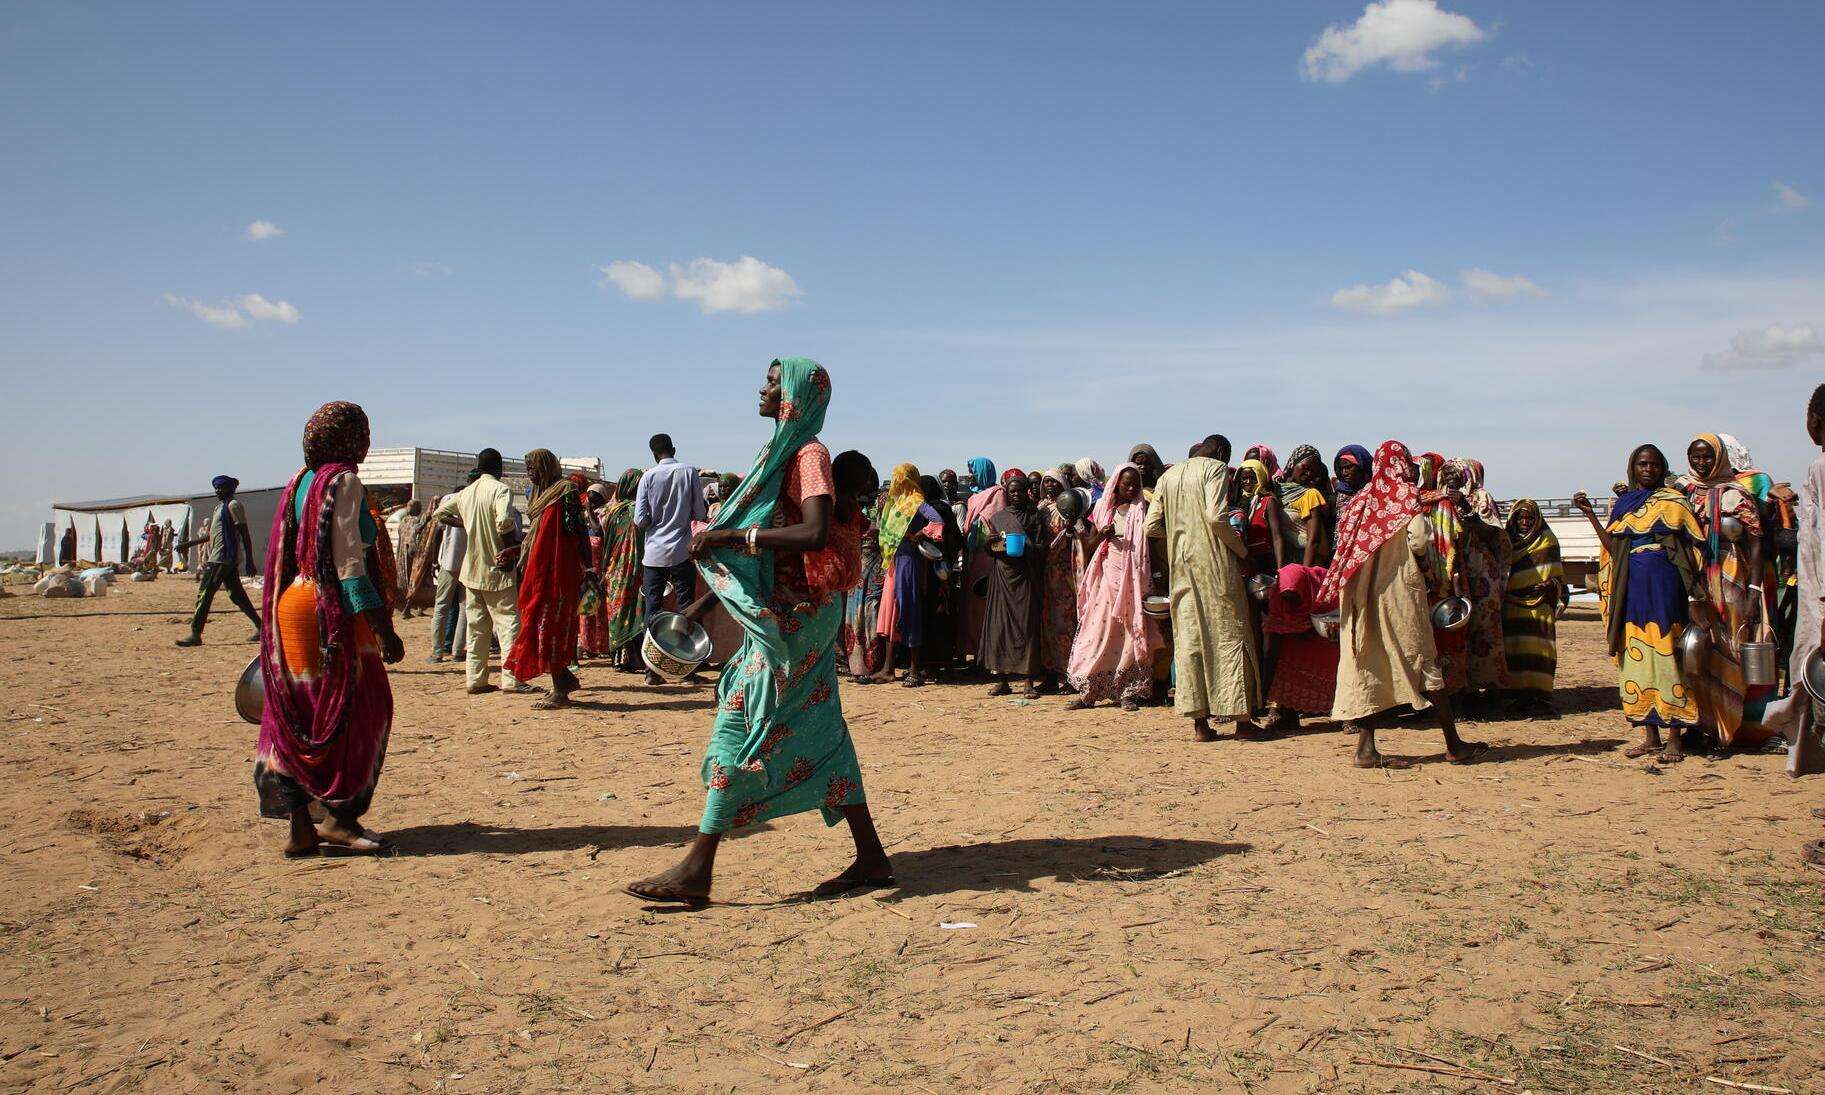 A woman in turquoise dress walks in front of crowd of people fleeing Sudan conflict to Chad 